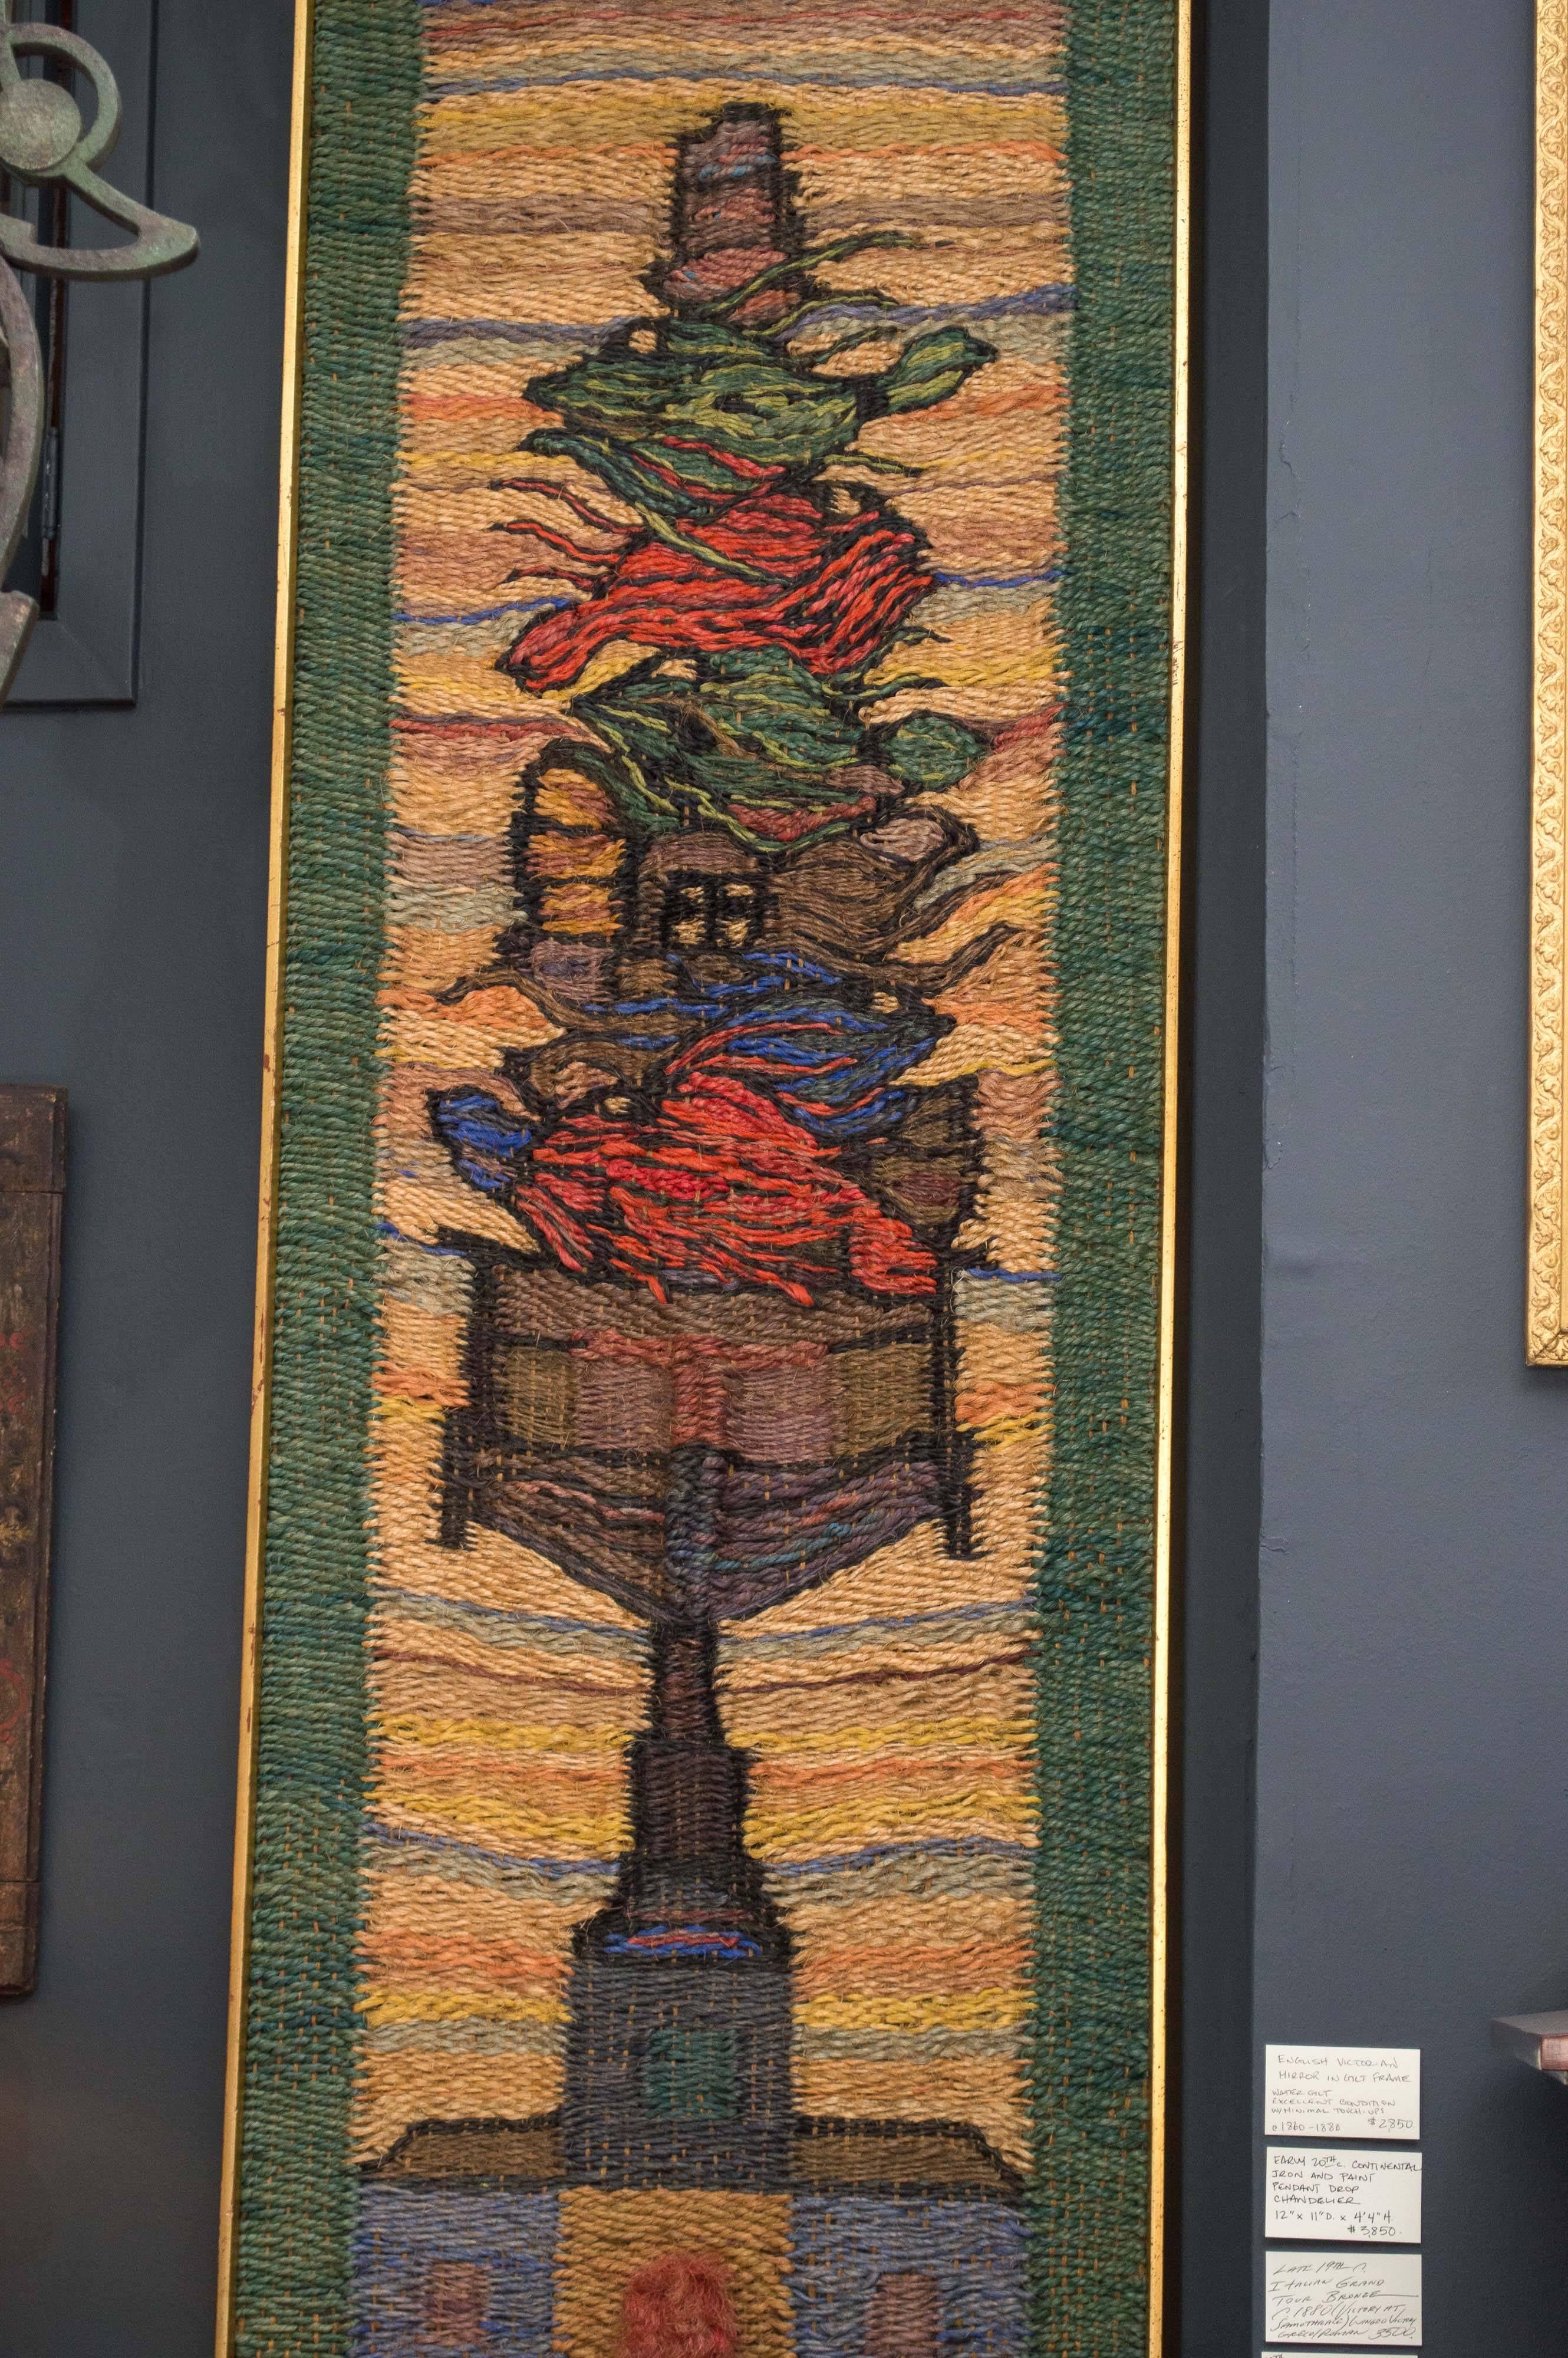 Framed hand-loomed jute weaving, circa 1970, by an unknown San Francisco artist. One of Four Seasons. Lively colors and intricate texture.